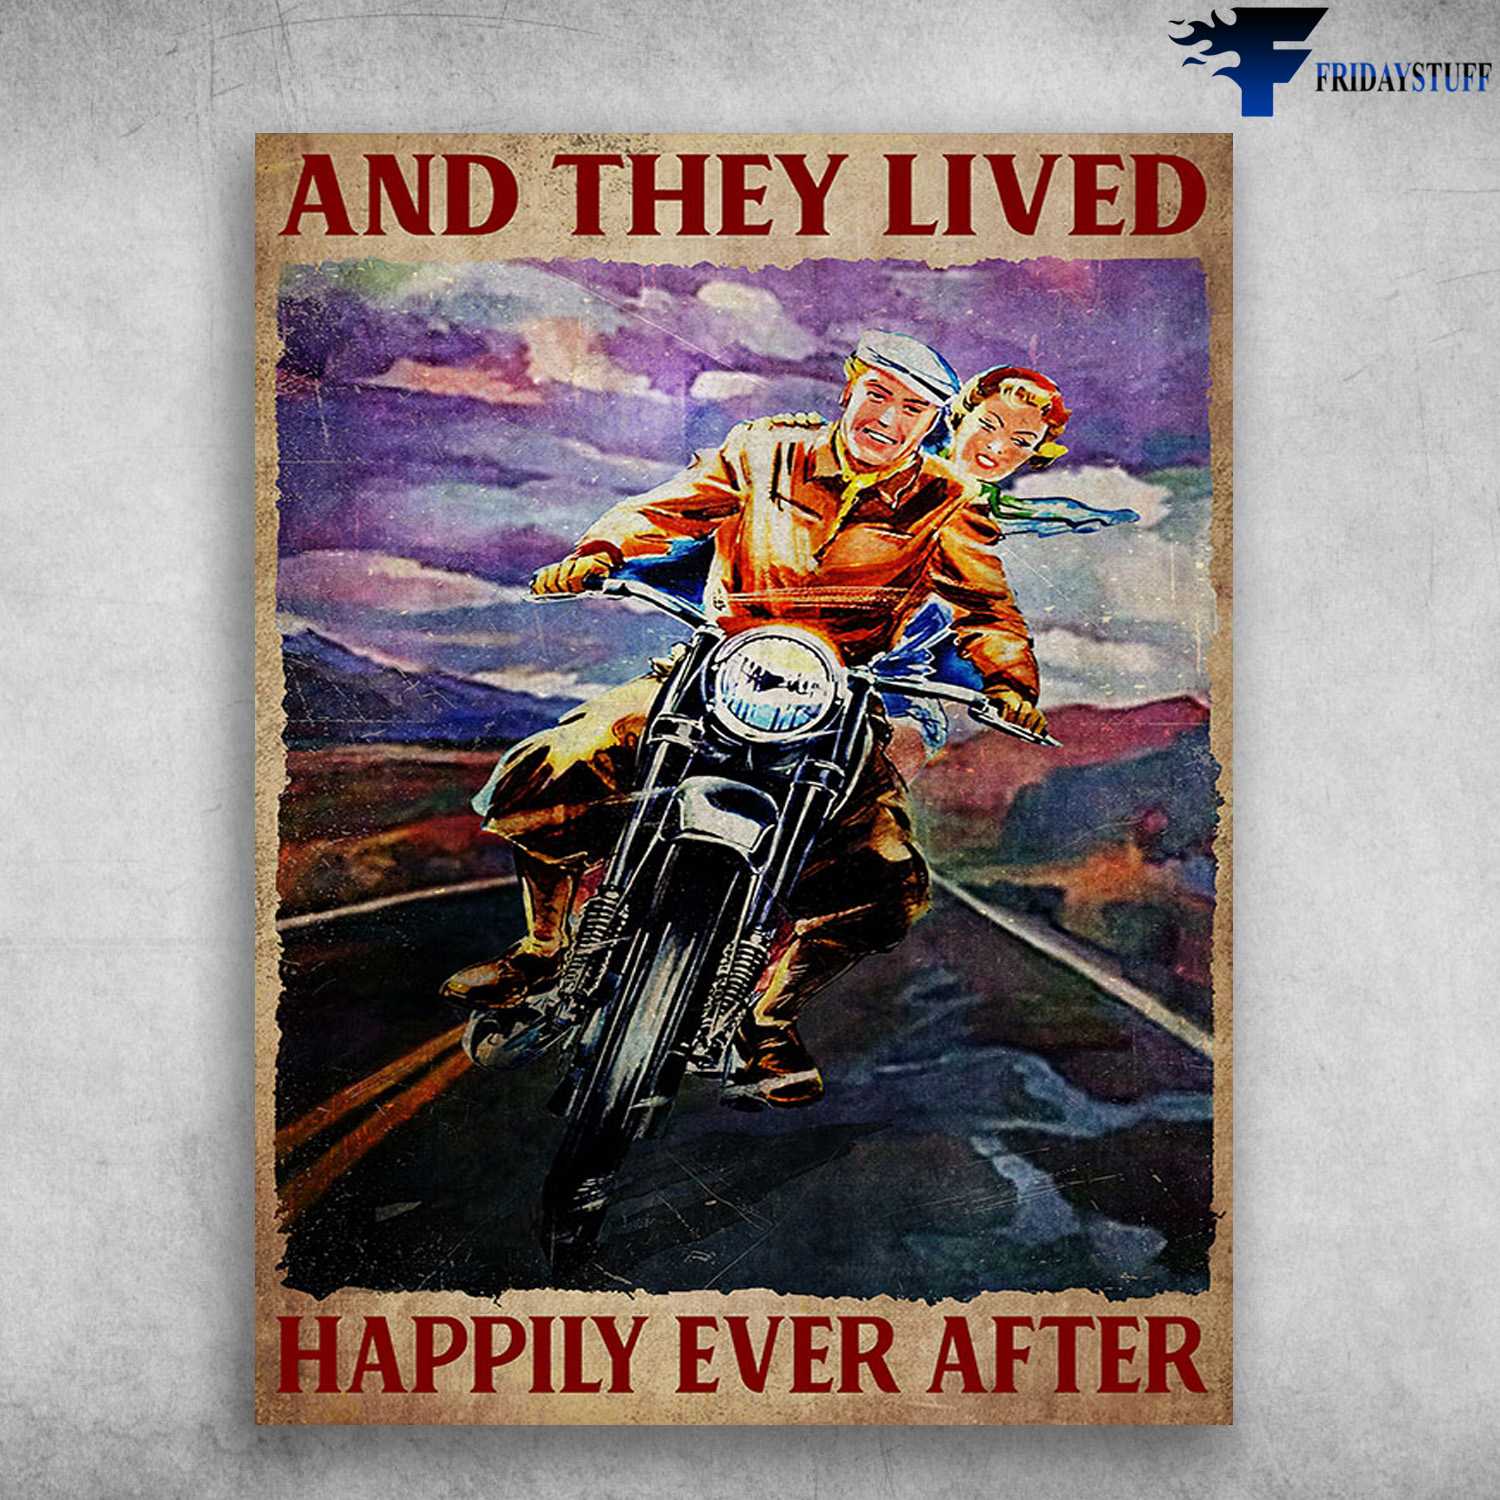 Motorcycle Lover, Couple Motorcycling - And They Lived, Happily Ever After